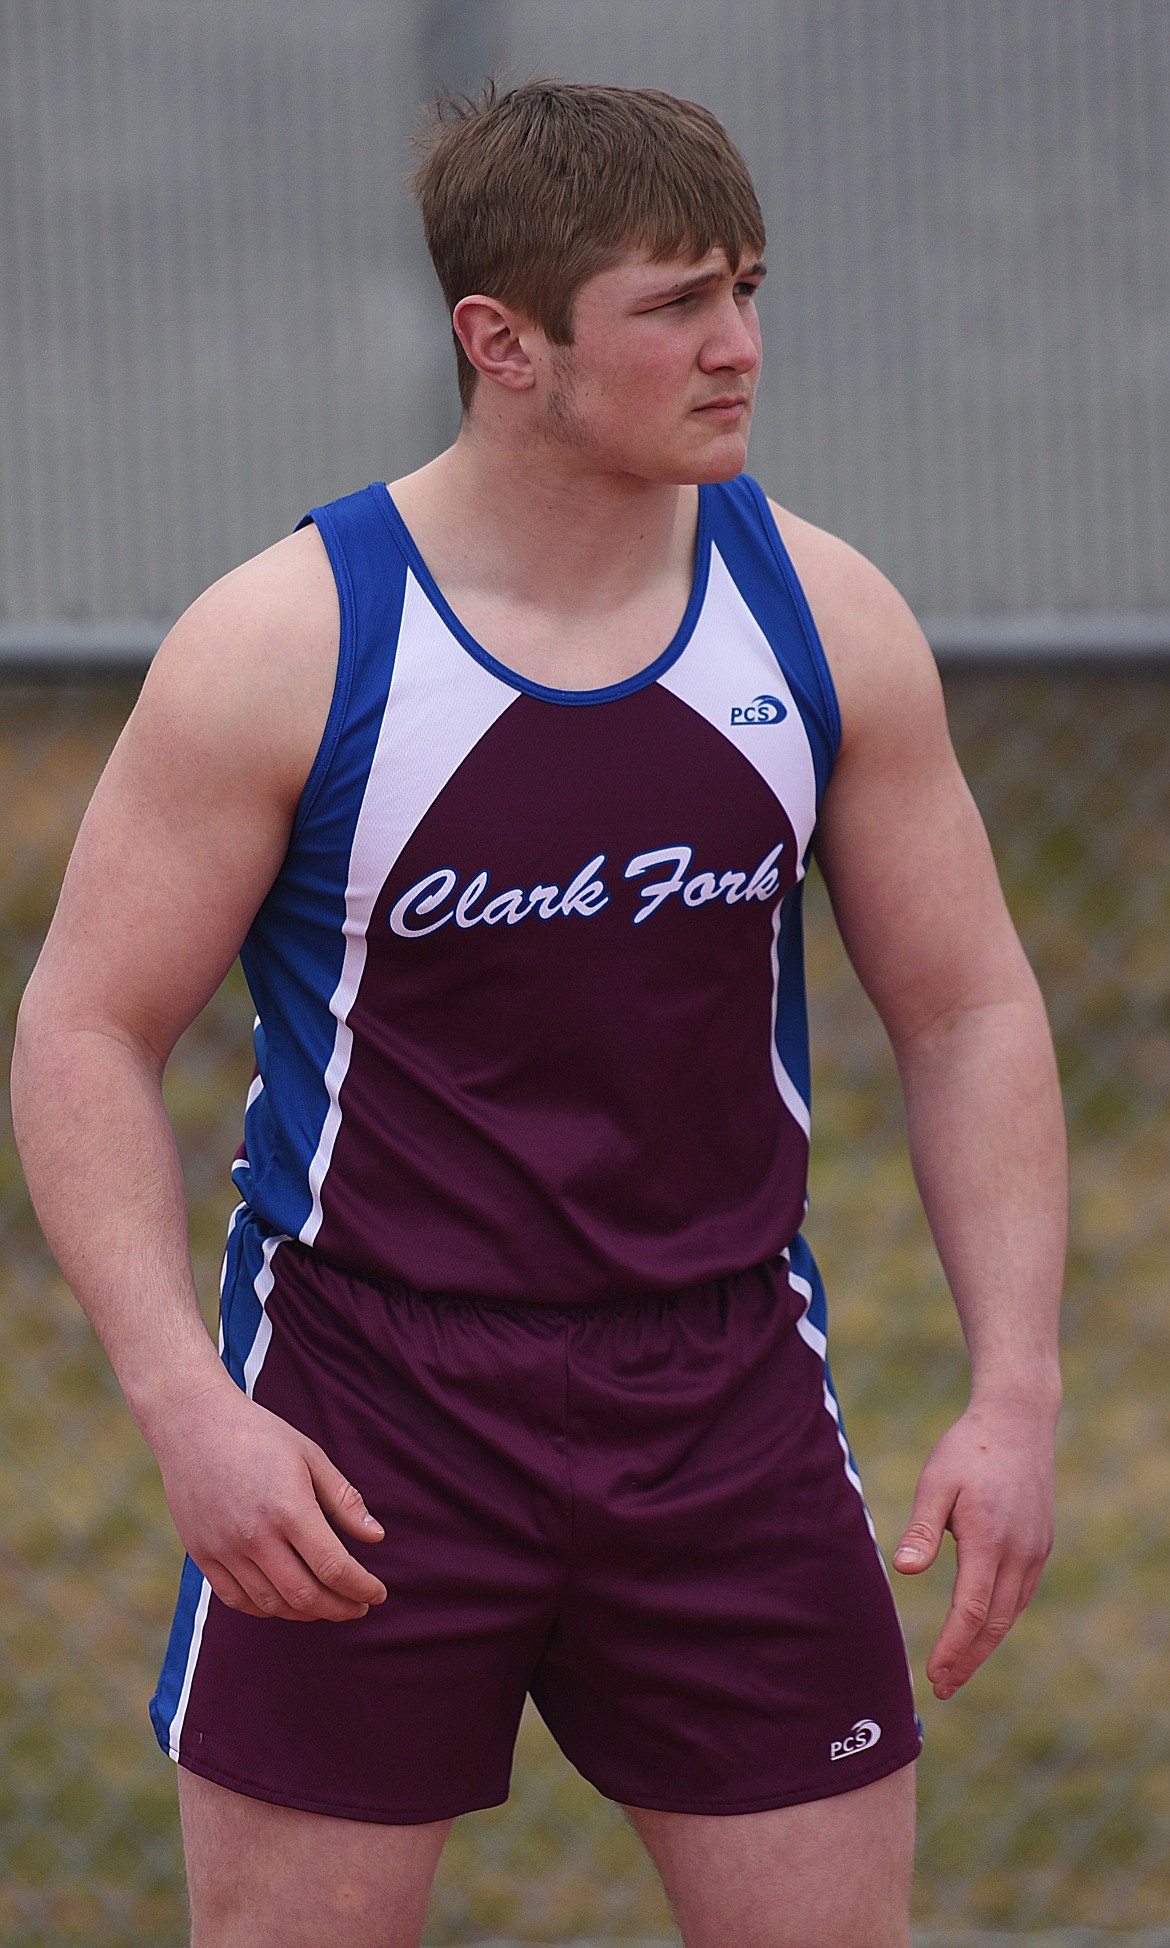 TREY GREEN of Clark Fork got his season started strong at the Frenchtown Invitational at Big Sky High School on Saturday, April 6. Above, Green prepares for a throw in the shot put. (Joe Sova/Mineral Independent)